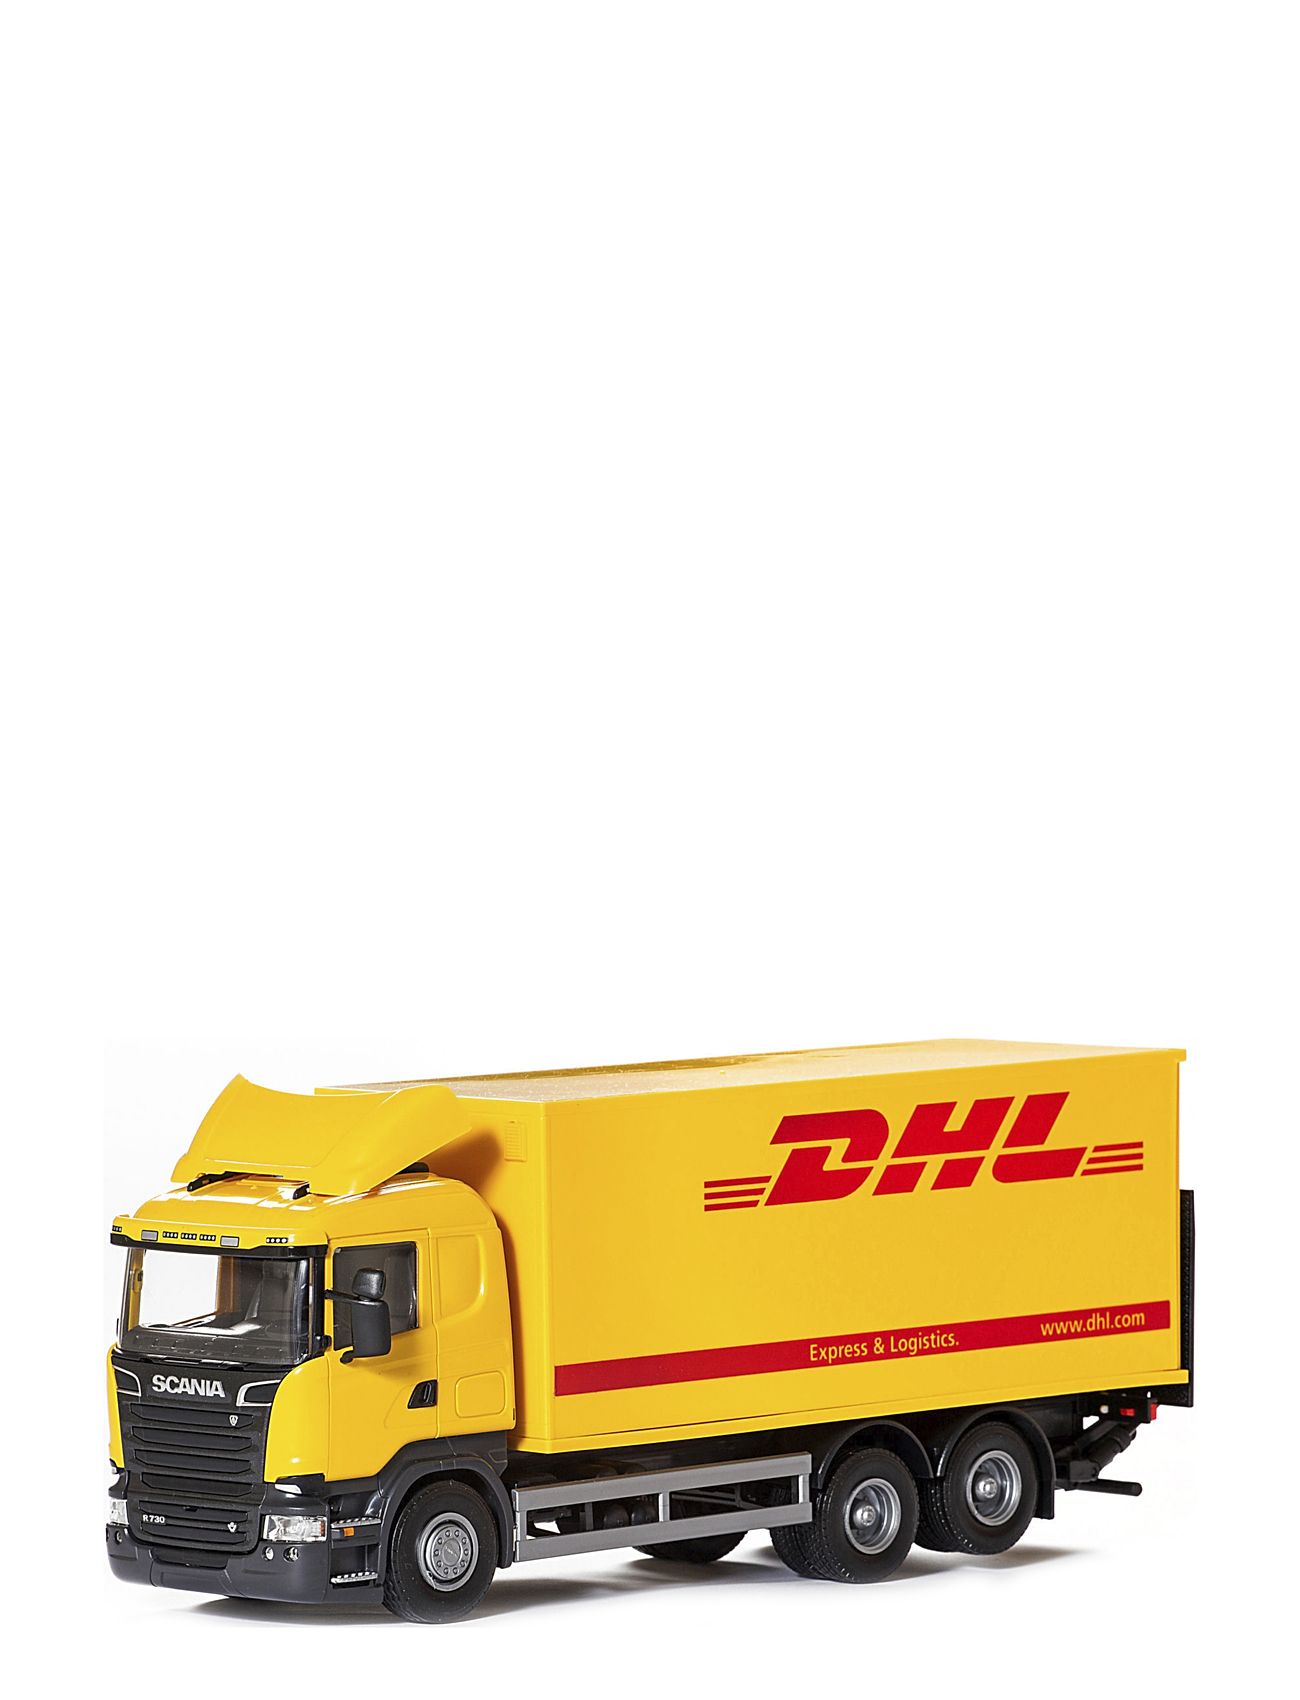 Scania Distributionsbil, Dhl Toys Toy Cars & Vehicles Toy Vehicles Construction Cars Multi/patterned EMEK